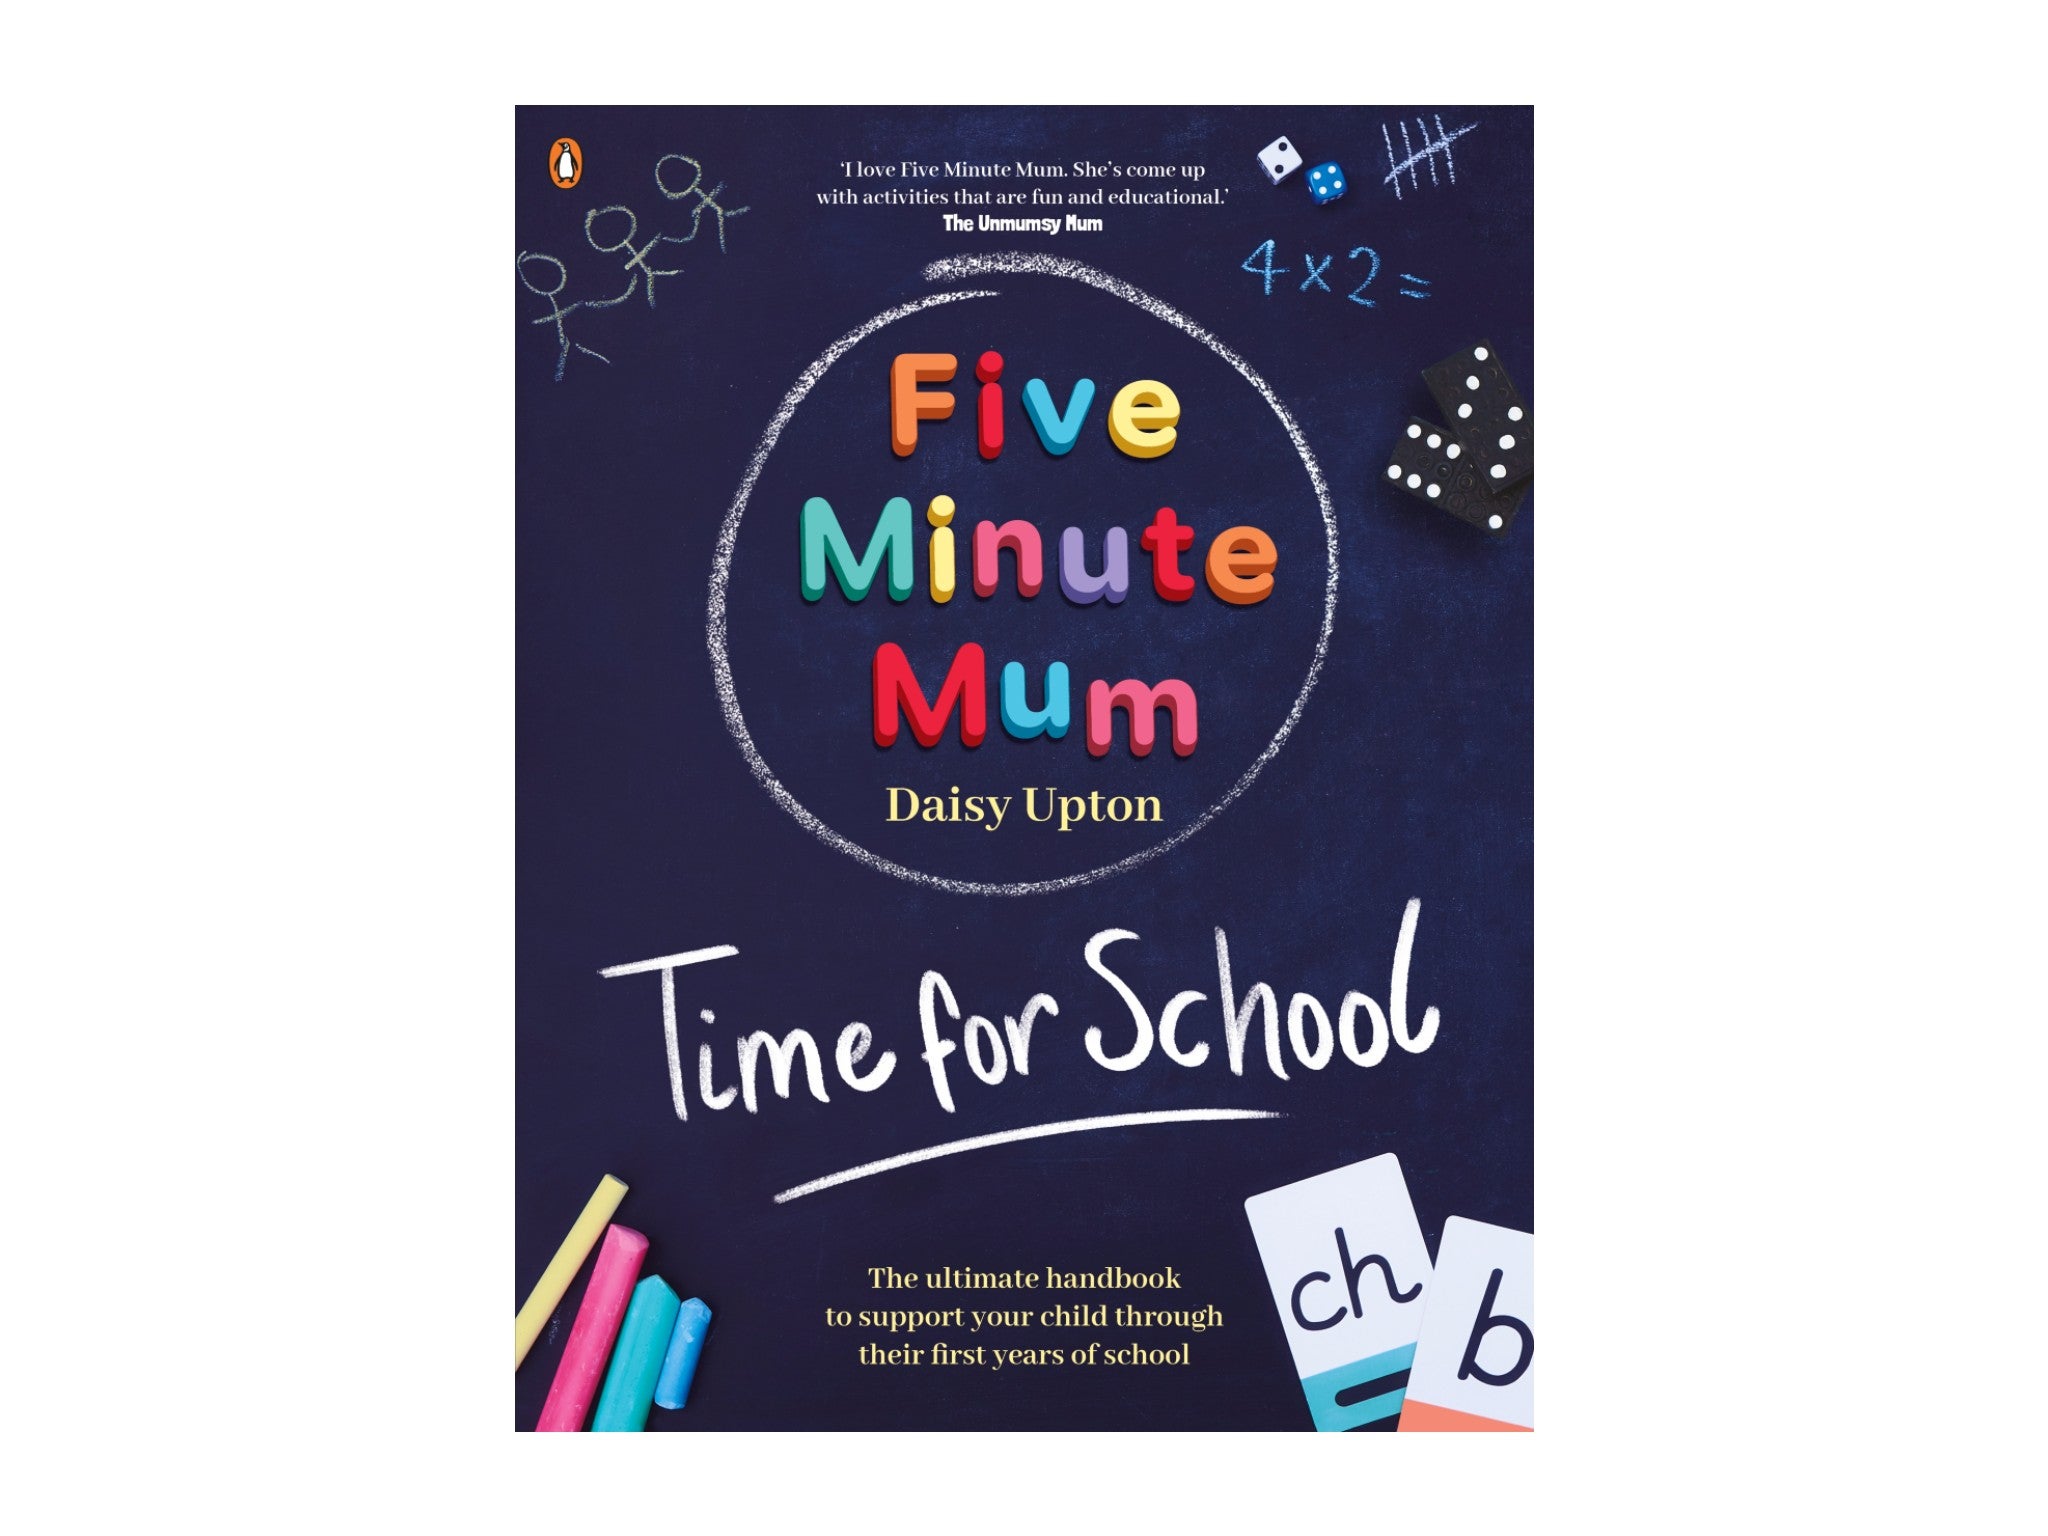 Five Minute Mum_ Time for School by Daisy Upton, published by Penguin Books indybest.jpeg